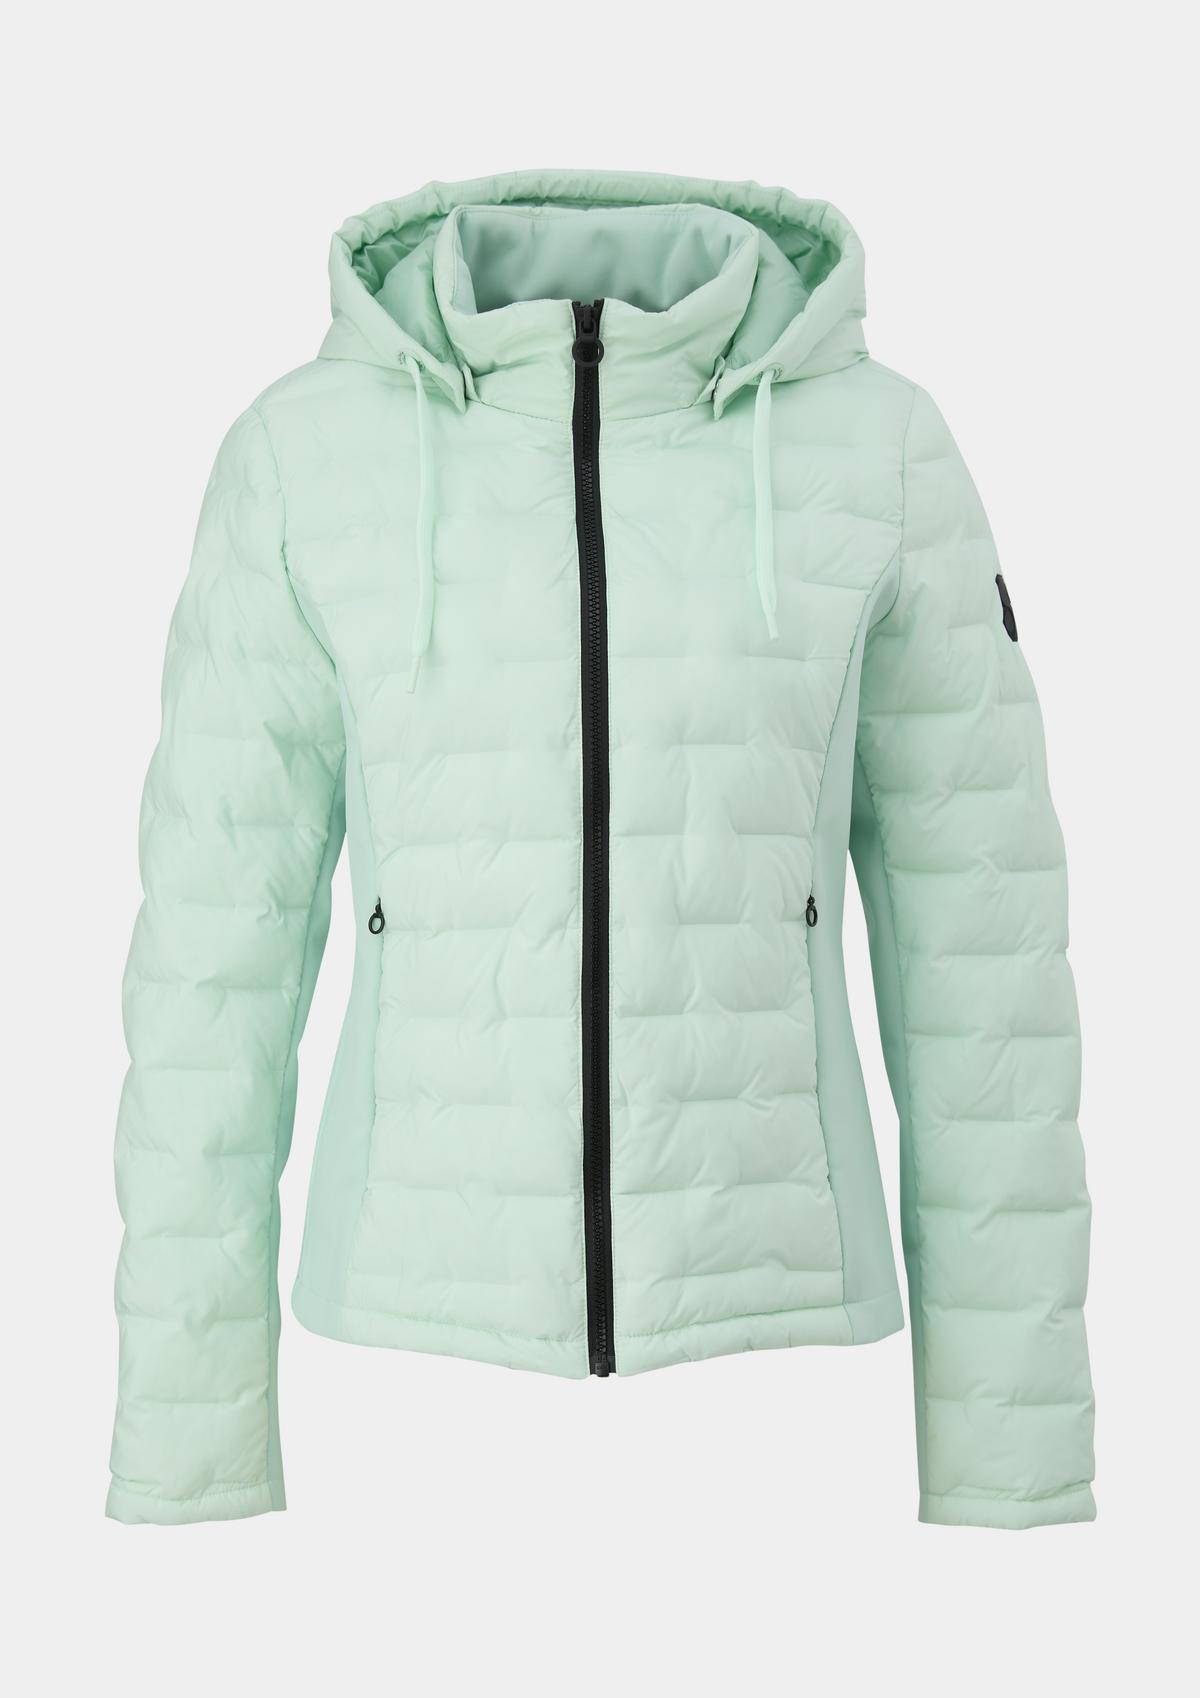 Padded outdoor a mix jacket offwhite materials in - of